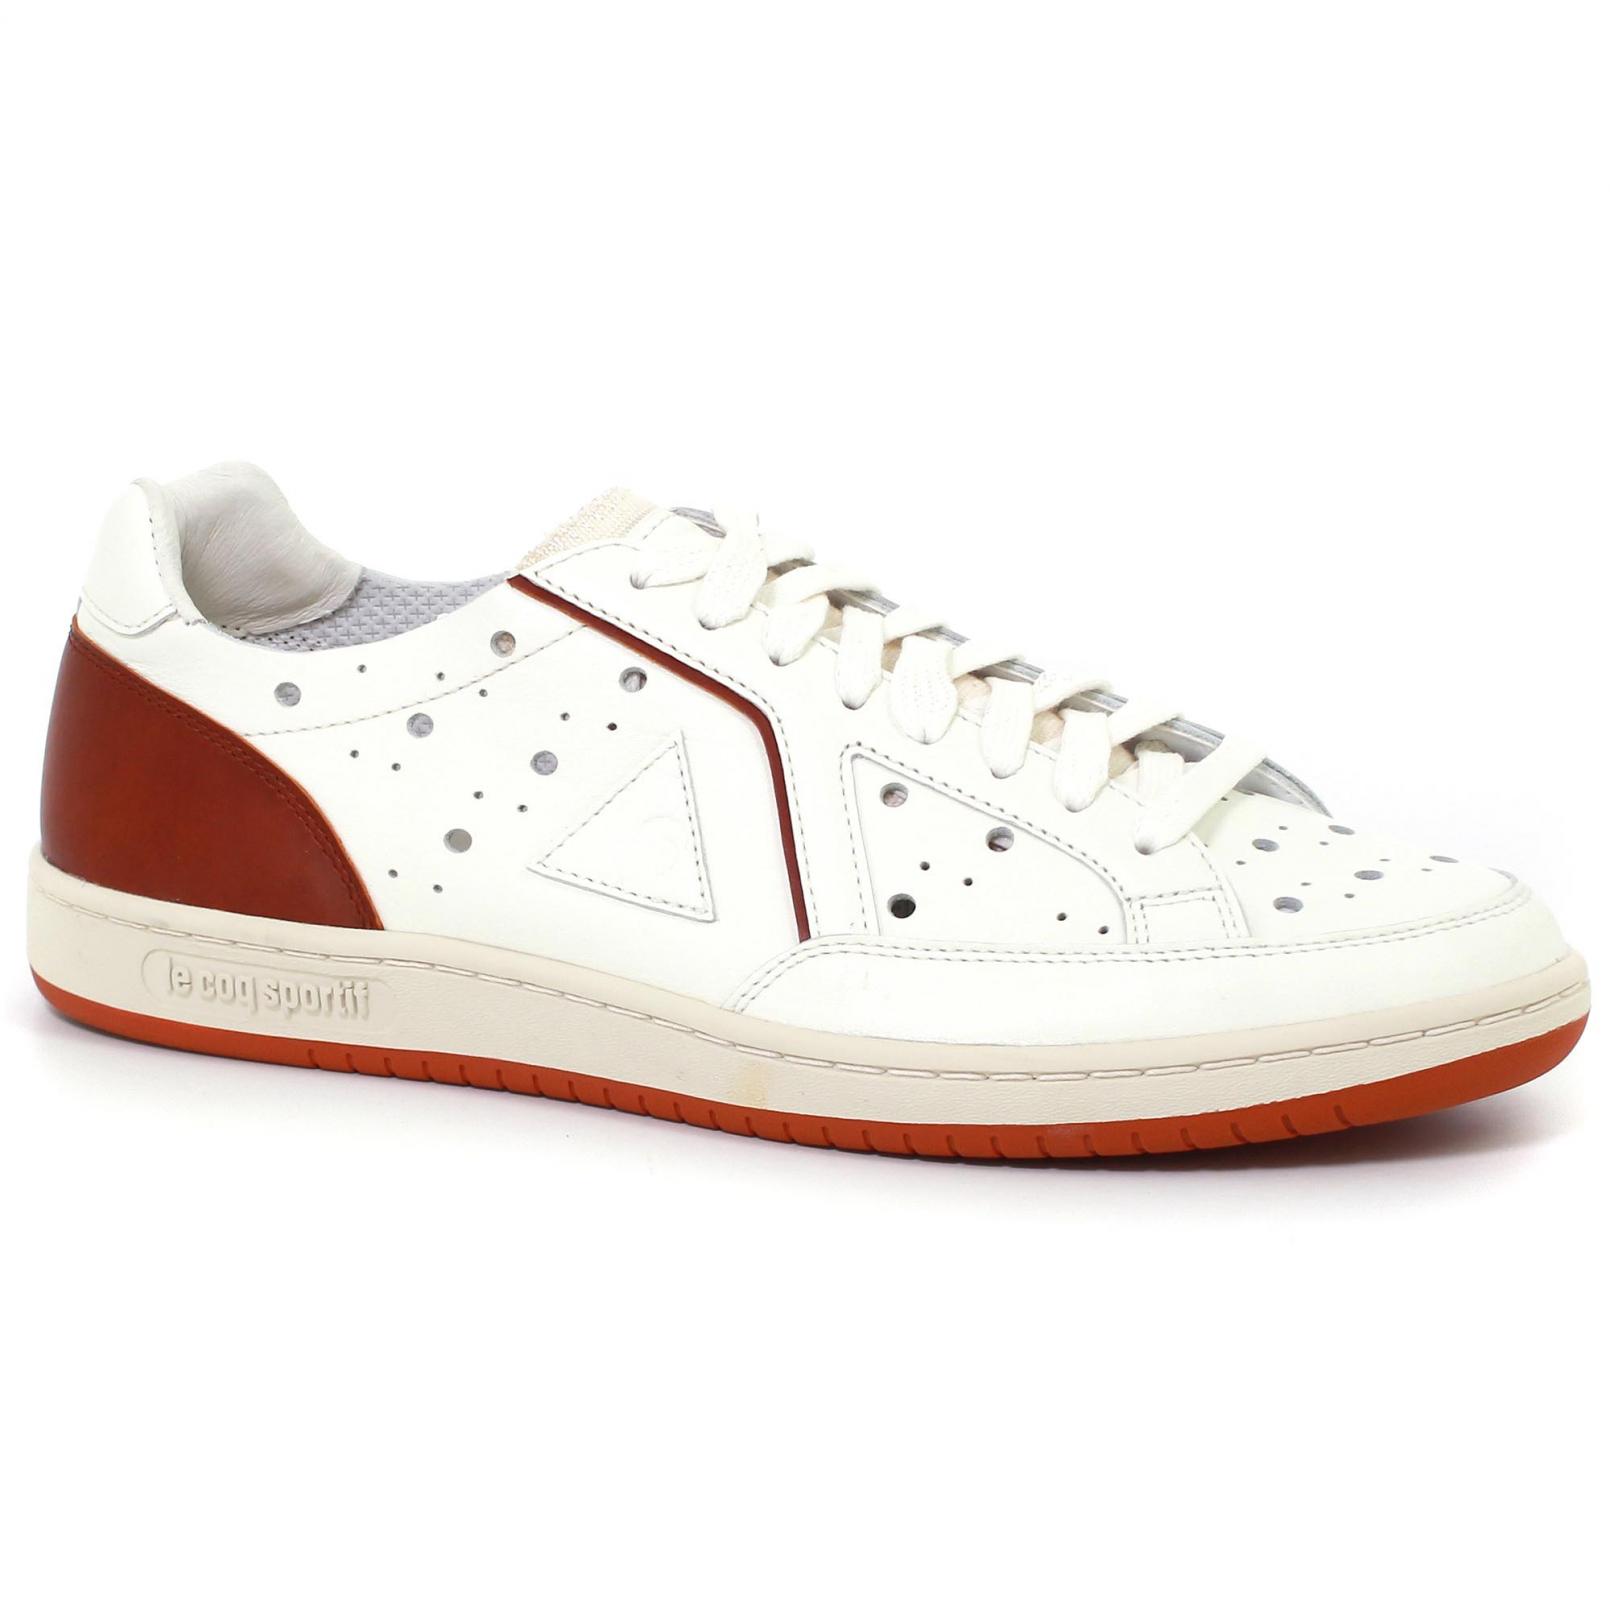 Shoes – Le Coq Sportif Icons Tr Leather Cream/Brown